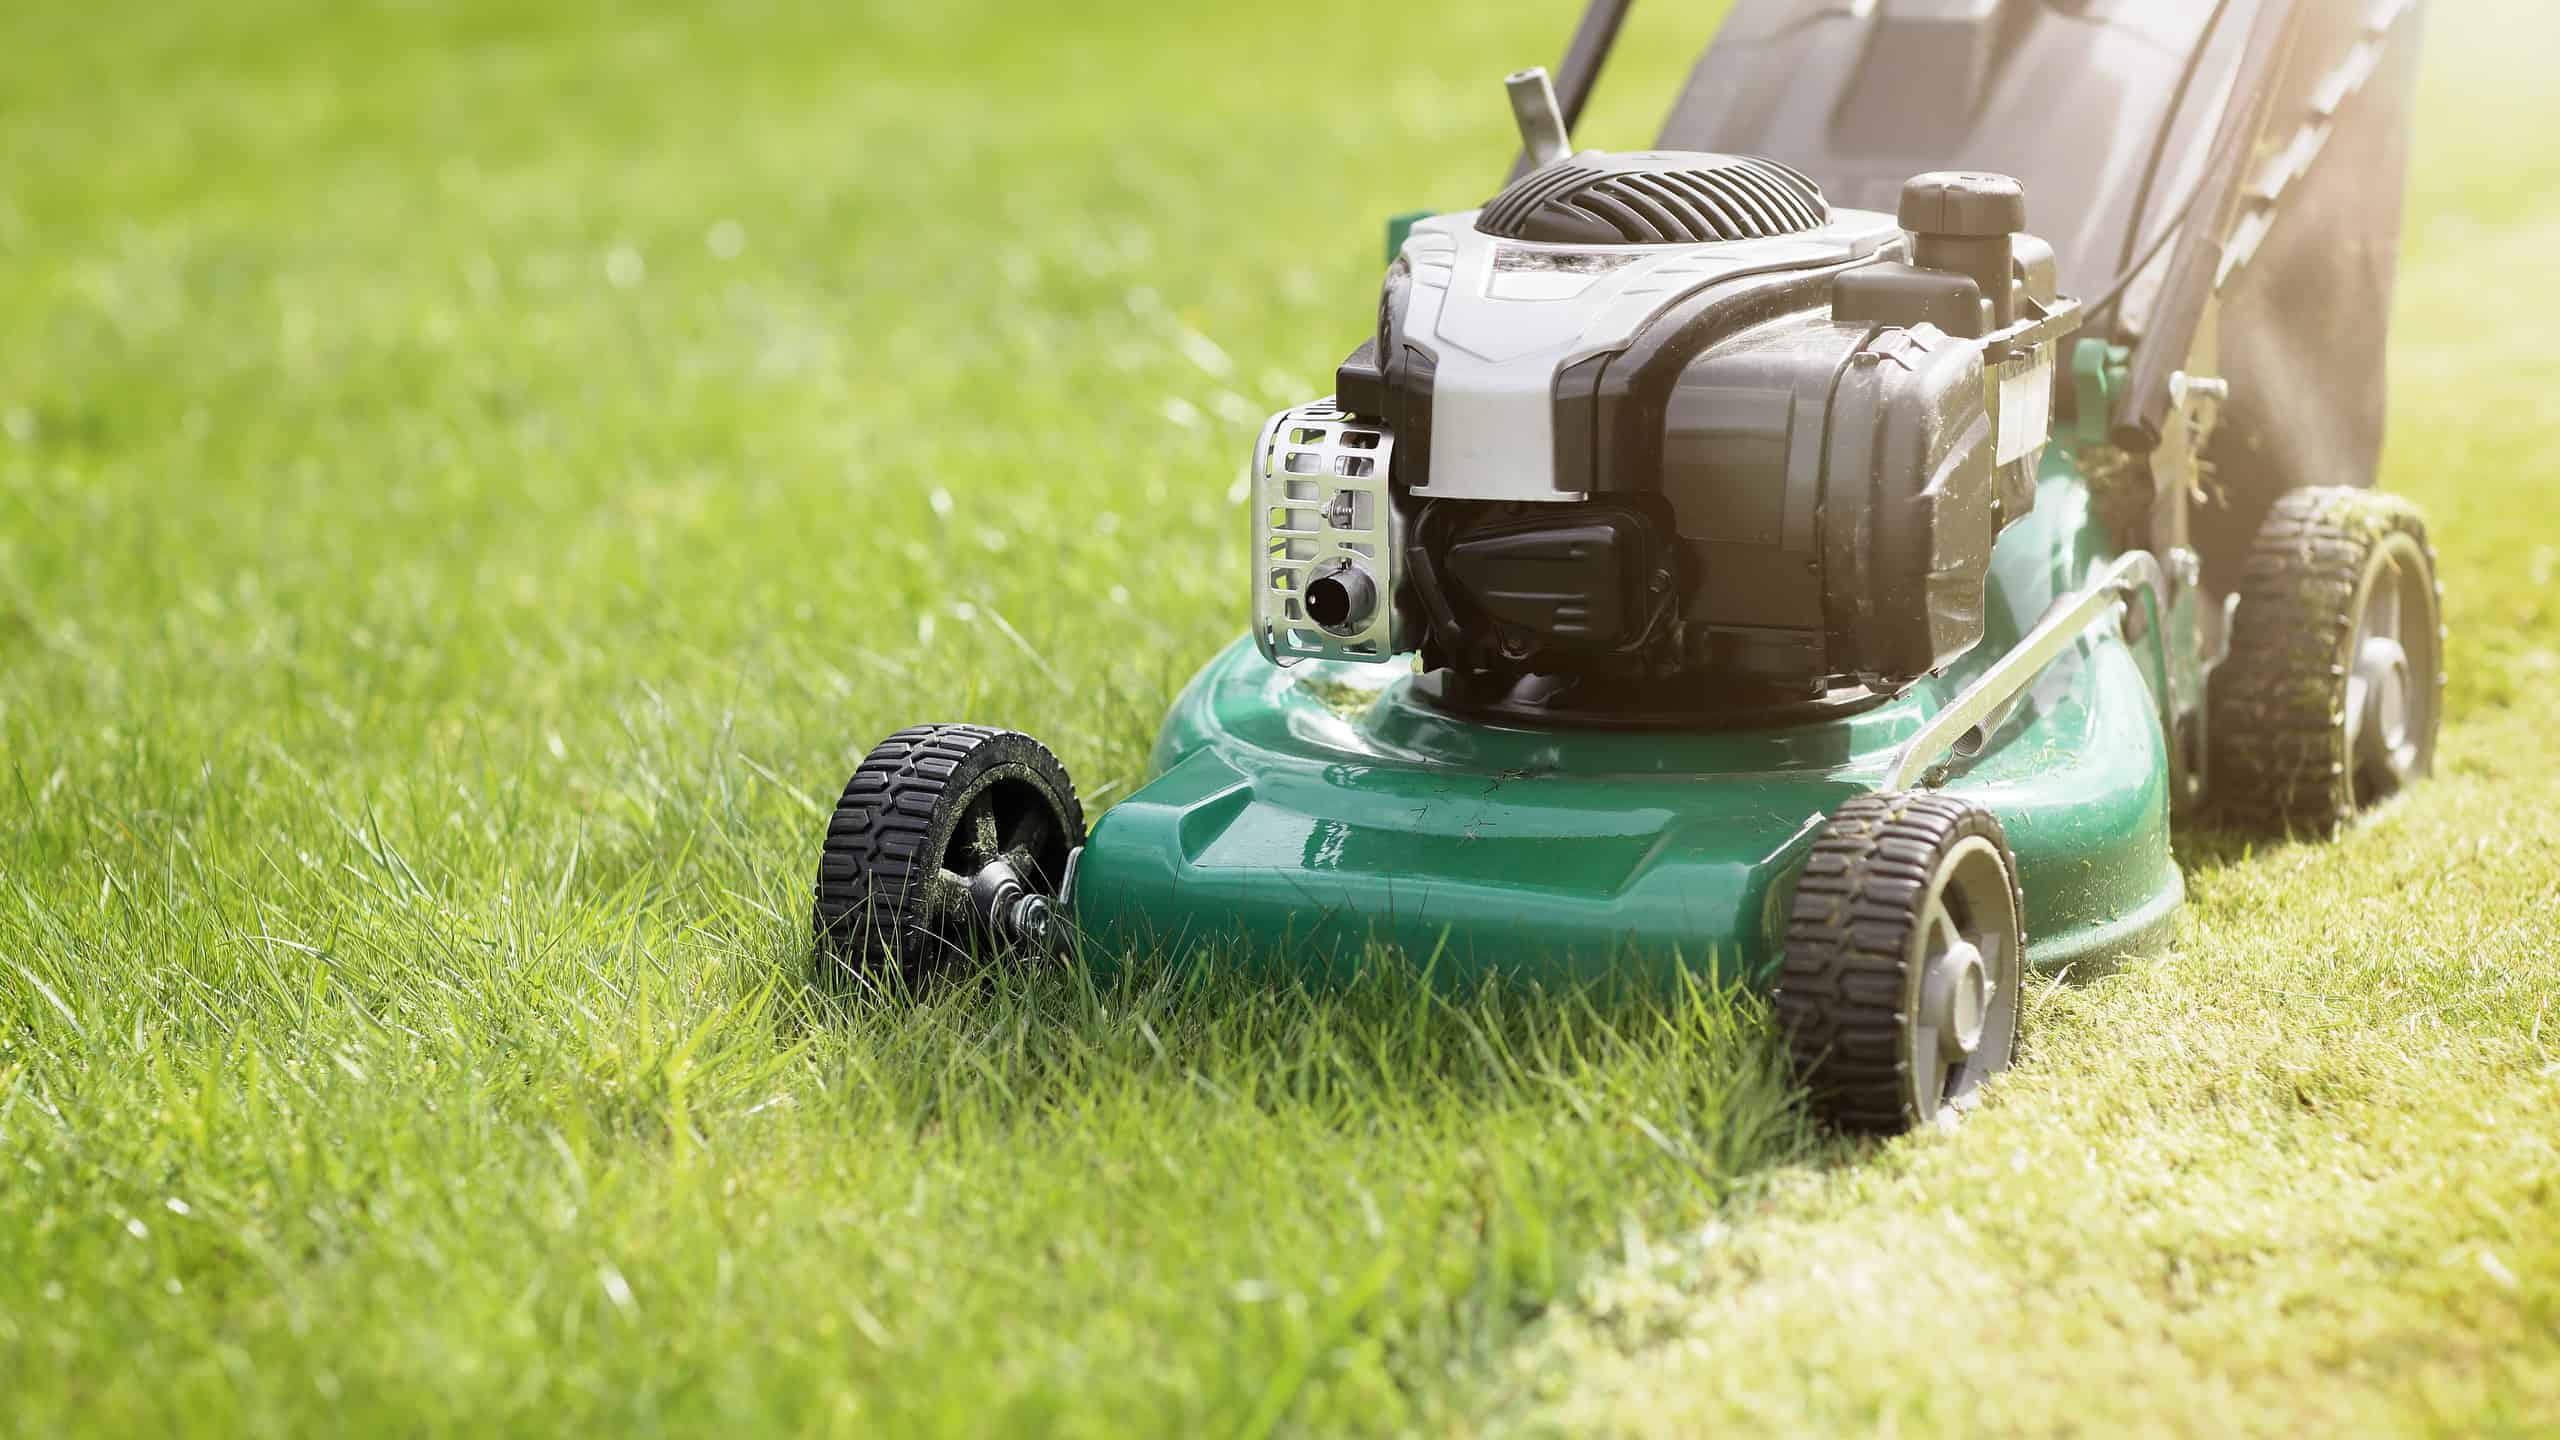 Lawn Mower, Mowing, Yard - Grounds, Lawn, Grass